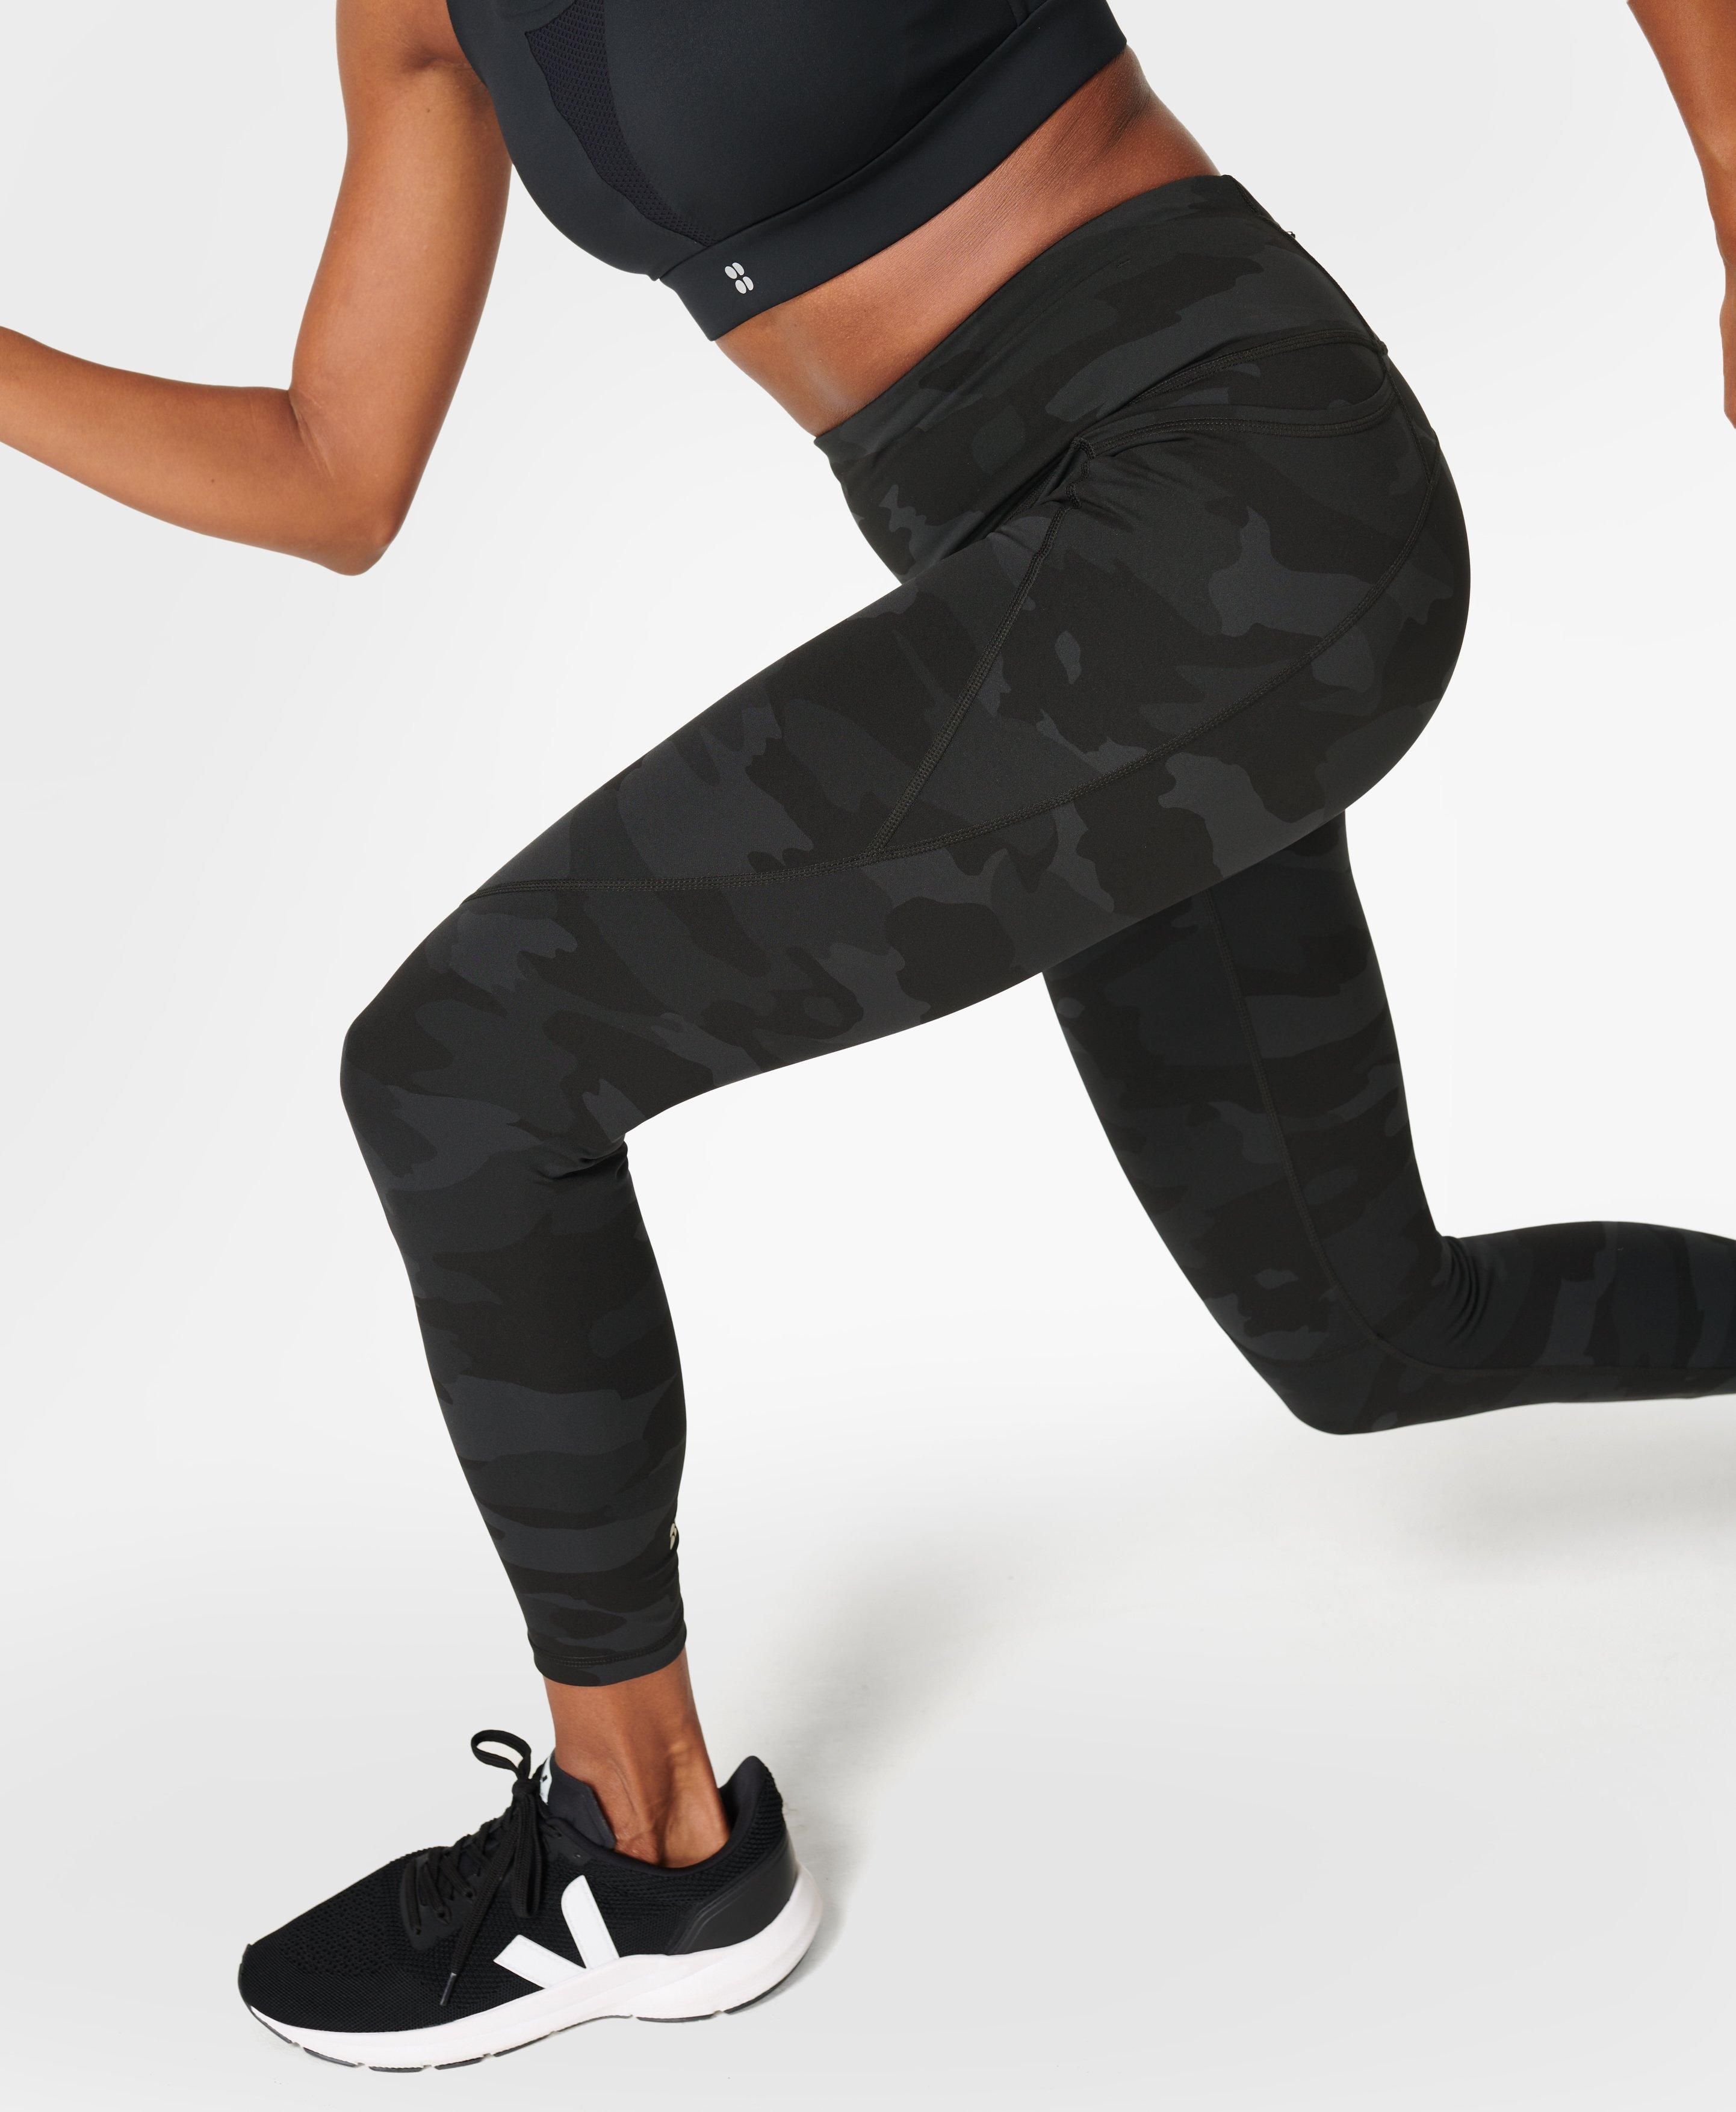 Sweaty Betty's Power Reflective Gym Leggings are now on sale for a huge 40%  off